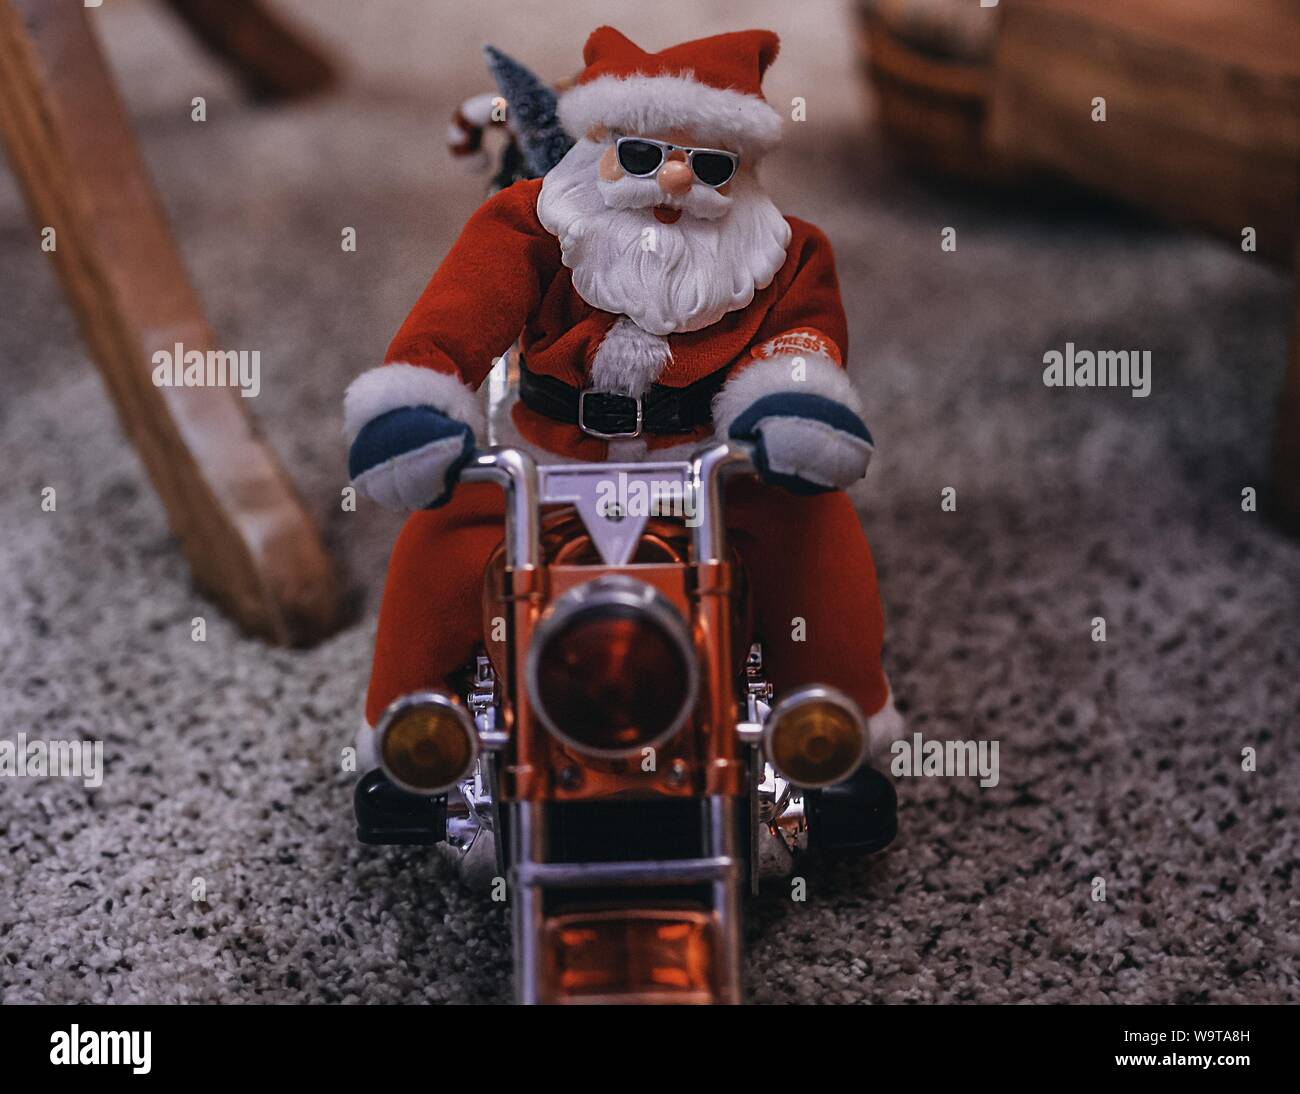 Closeup shot of a Santa Claus figurine on a motorcycle Stock Photo